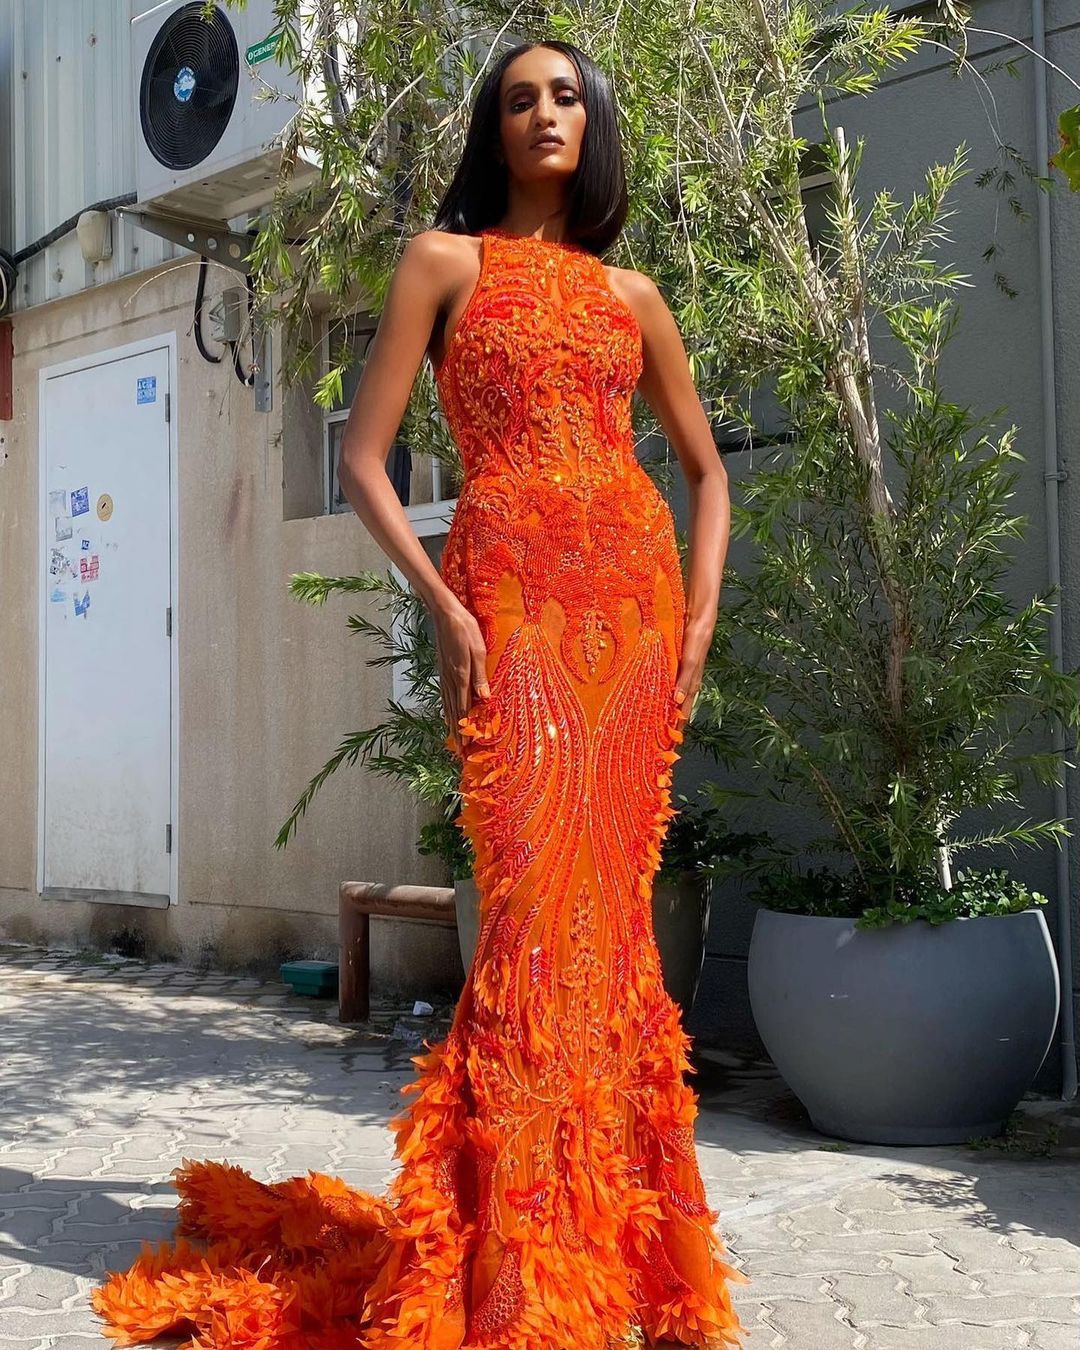 The Real Housewives of Dubai's Best Fashion Looks So Far